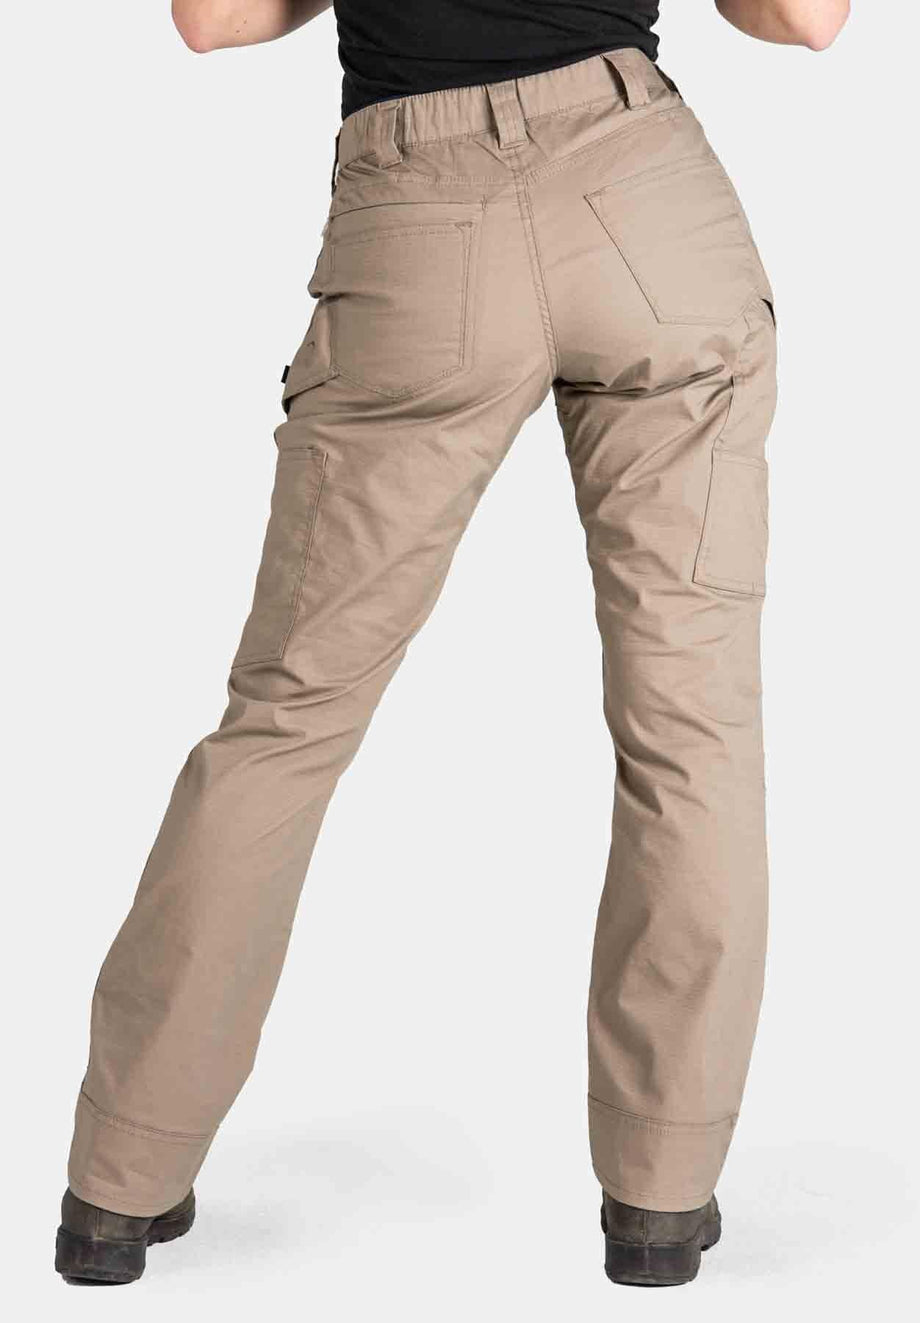 Best hot sale Women's Mid-Rise Straight Leg Chino Pants - A New Day™ - A  New Day popular shop